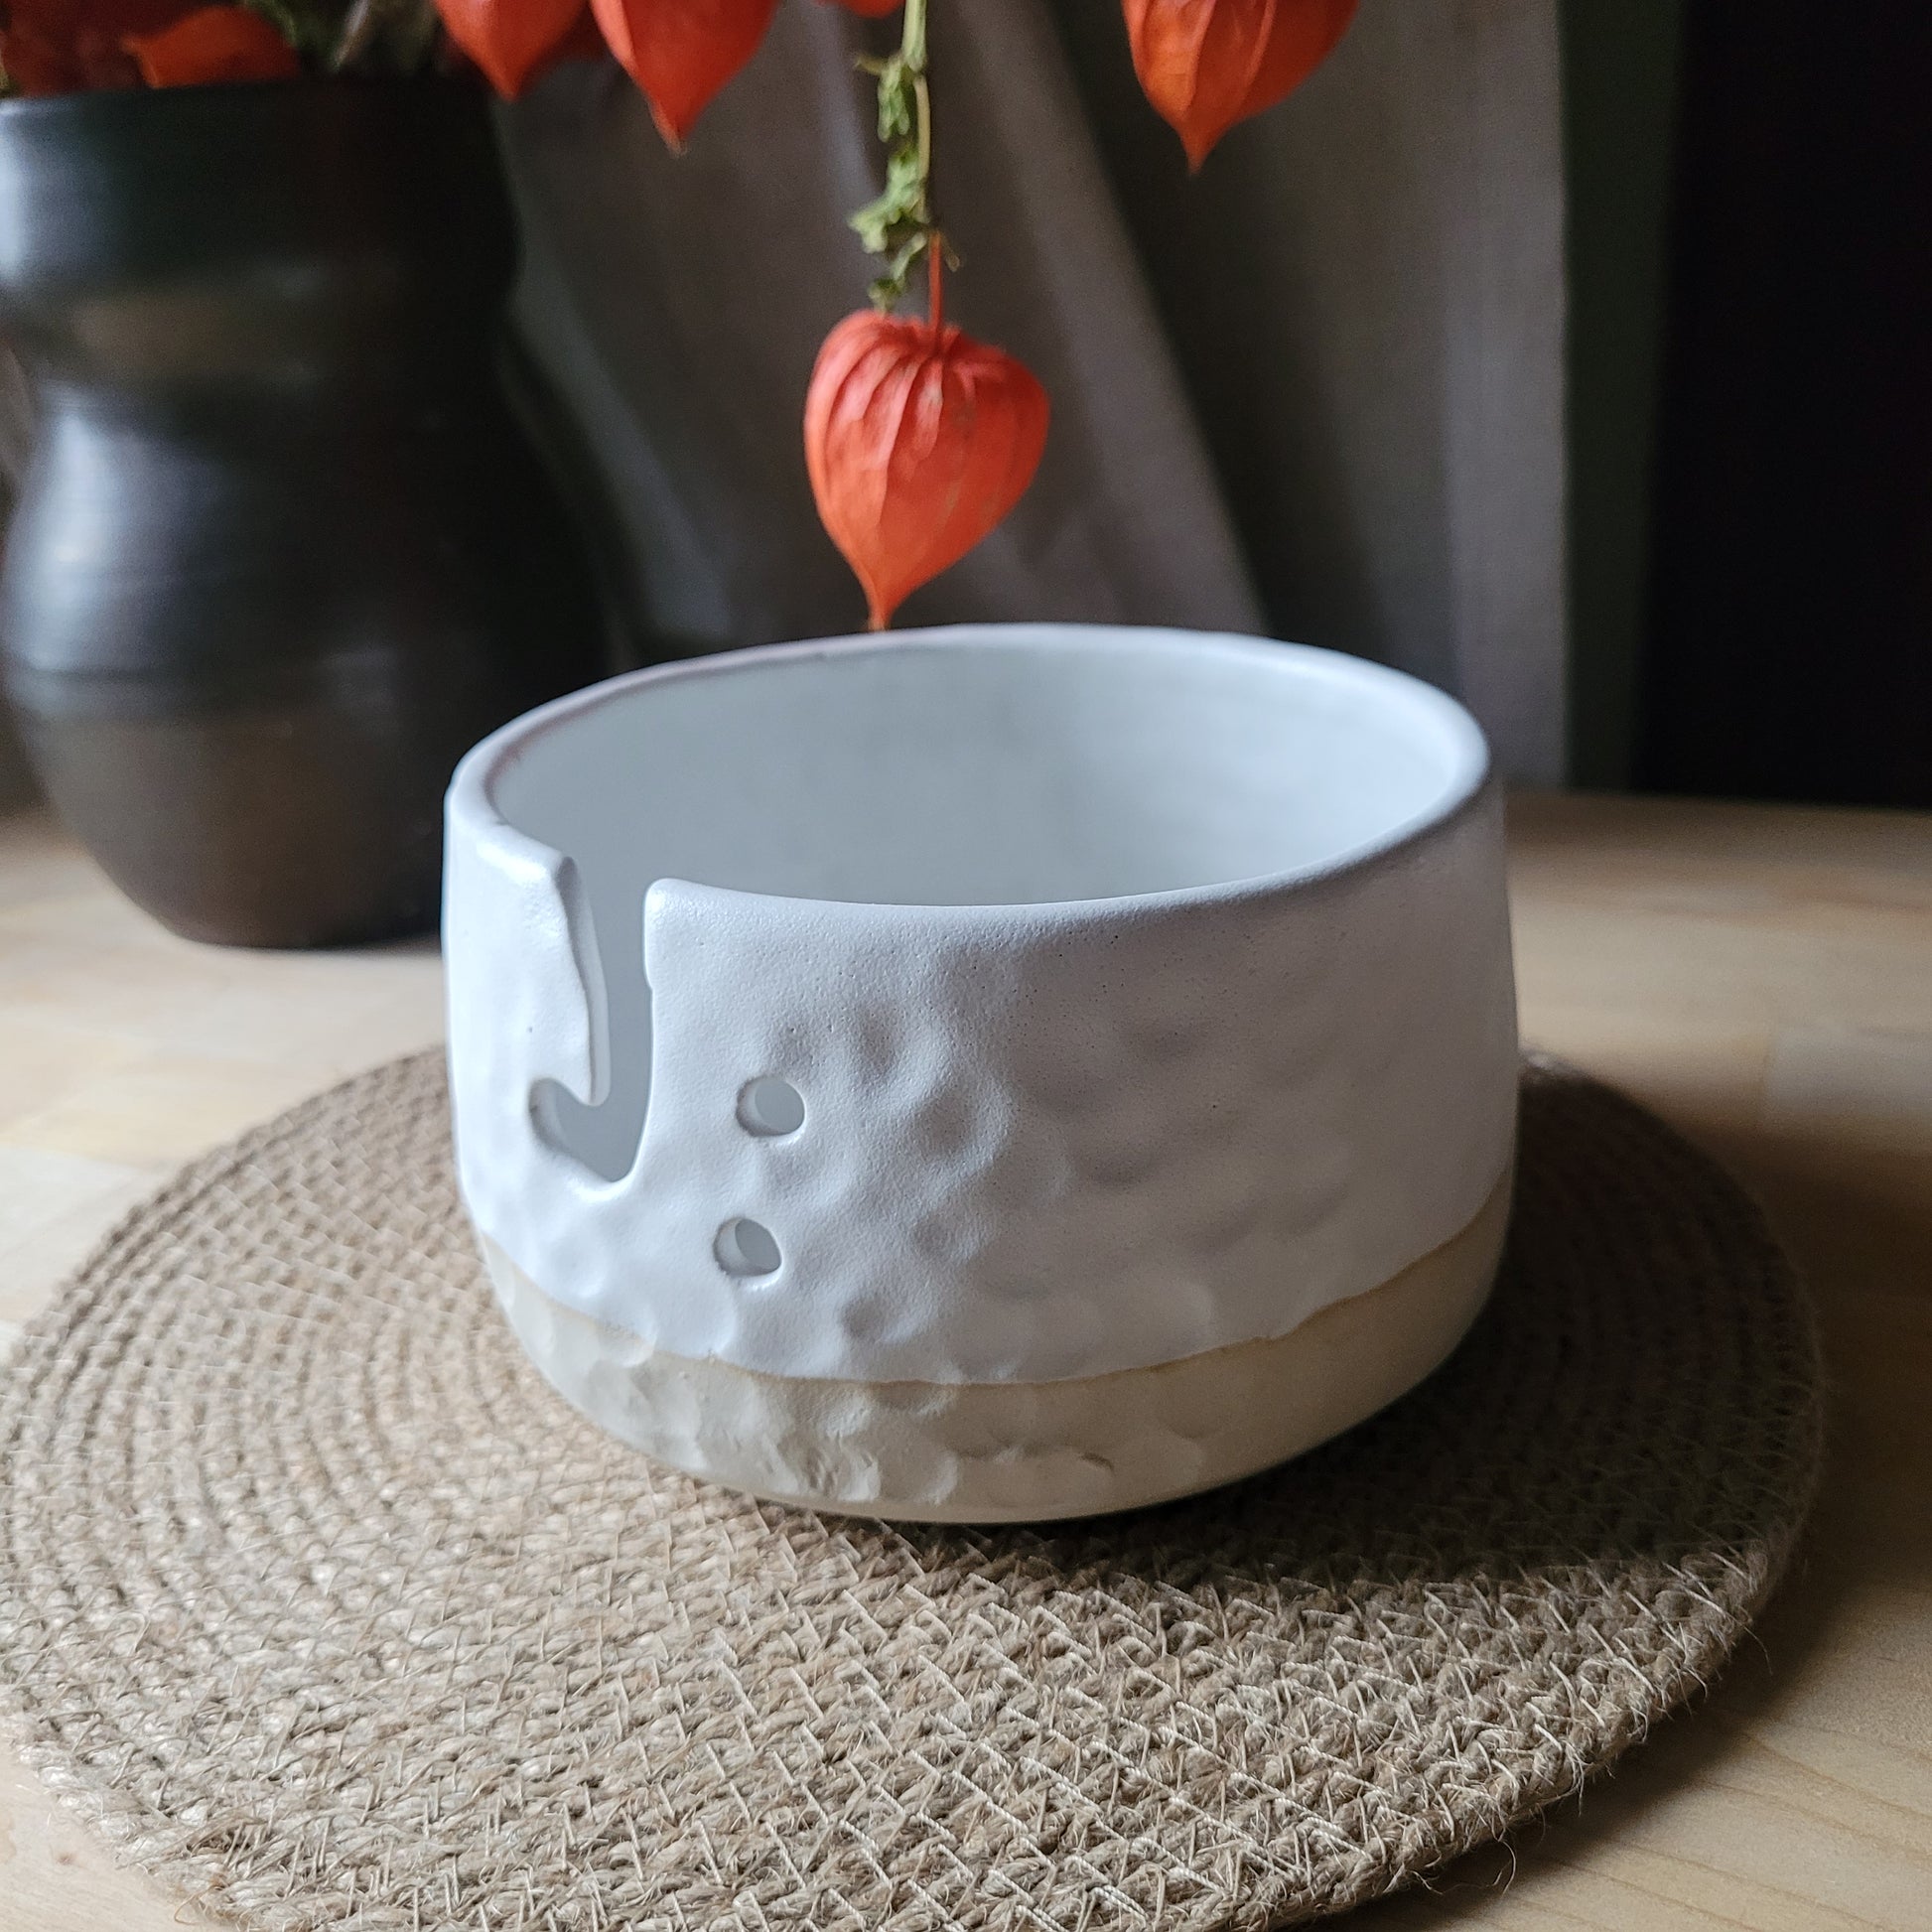 Contemporary Ceramic Yarn Bowl - White with Matte Glaze and Textured Design. This handmade yarn bowl showcases a modern design with its matte glaze and unique texture. An essential tool for crocheters and knitters, it keeps your yarn neatly in place while adding a touch of style to your crafting space.